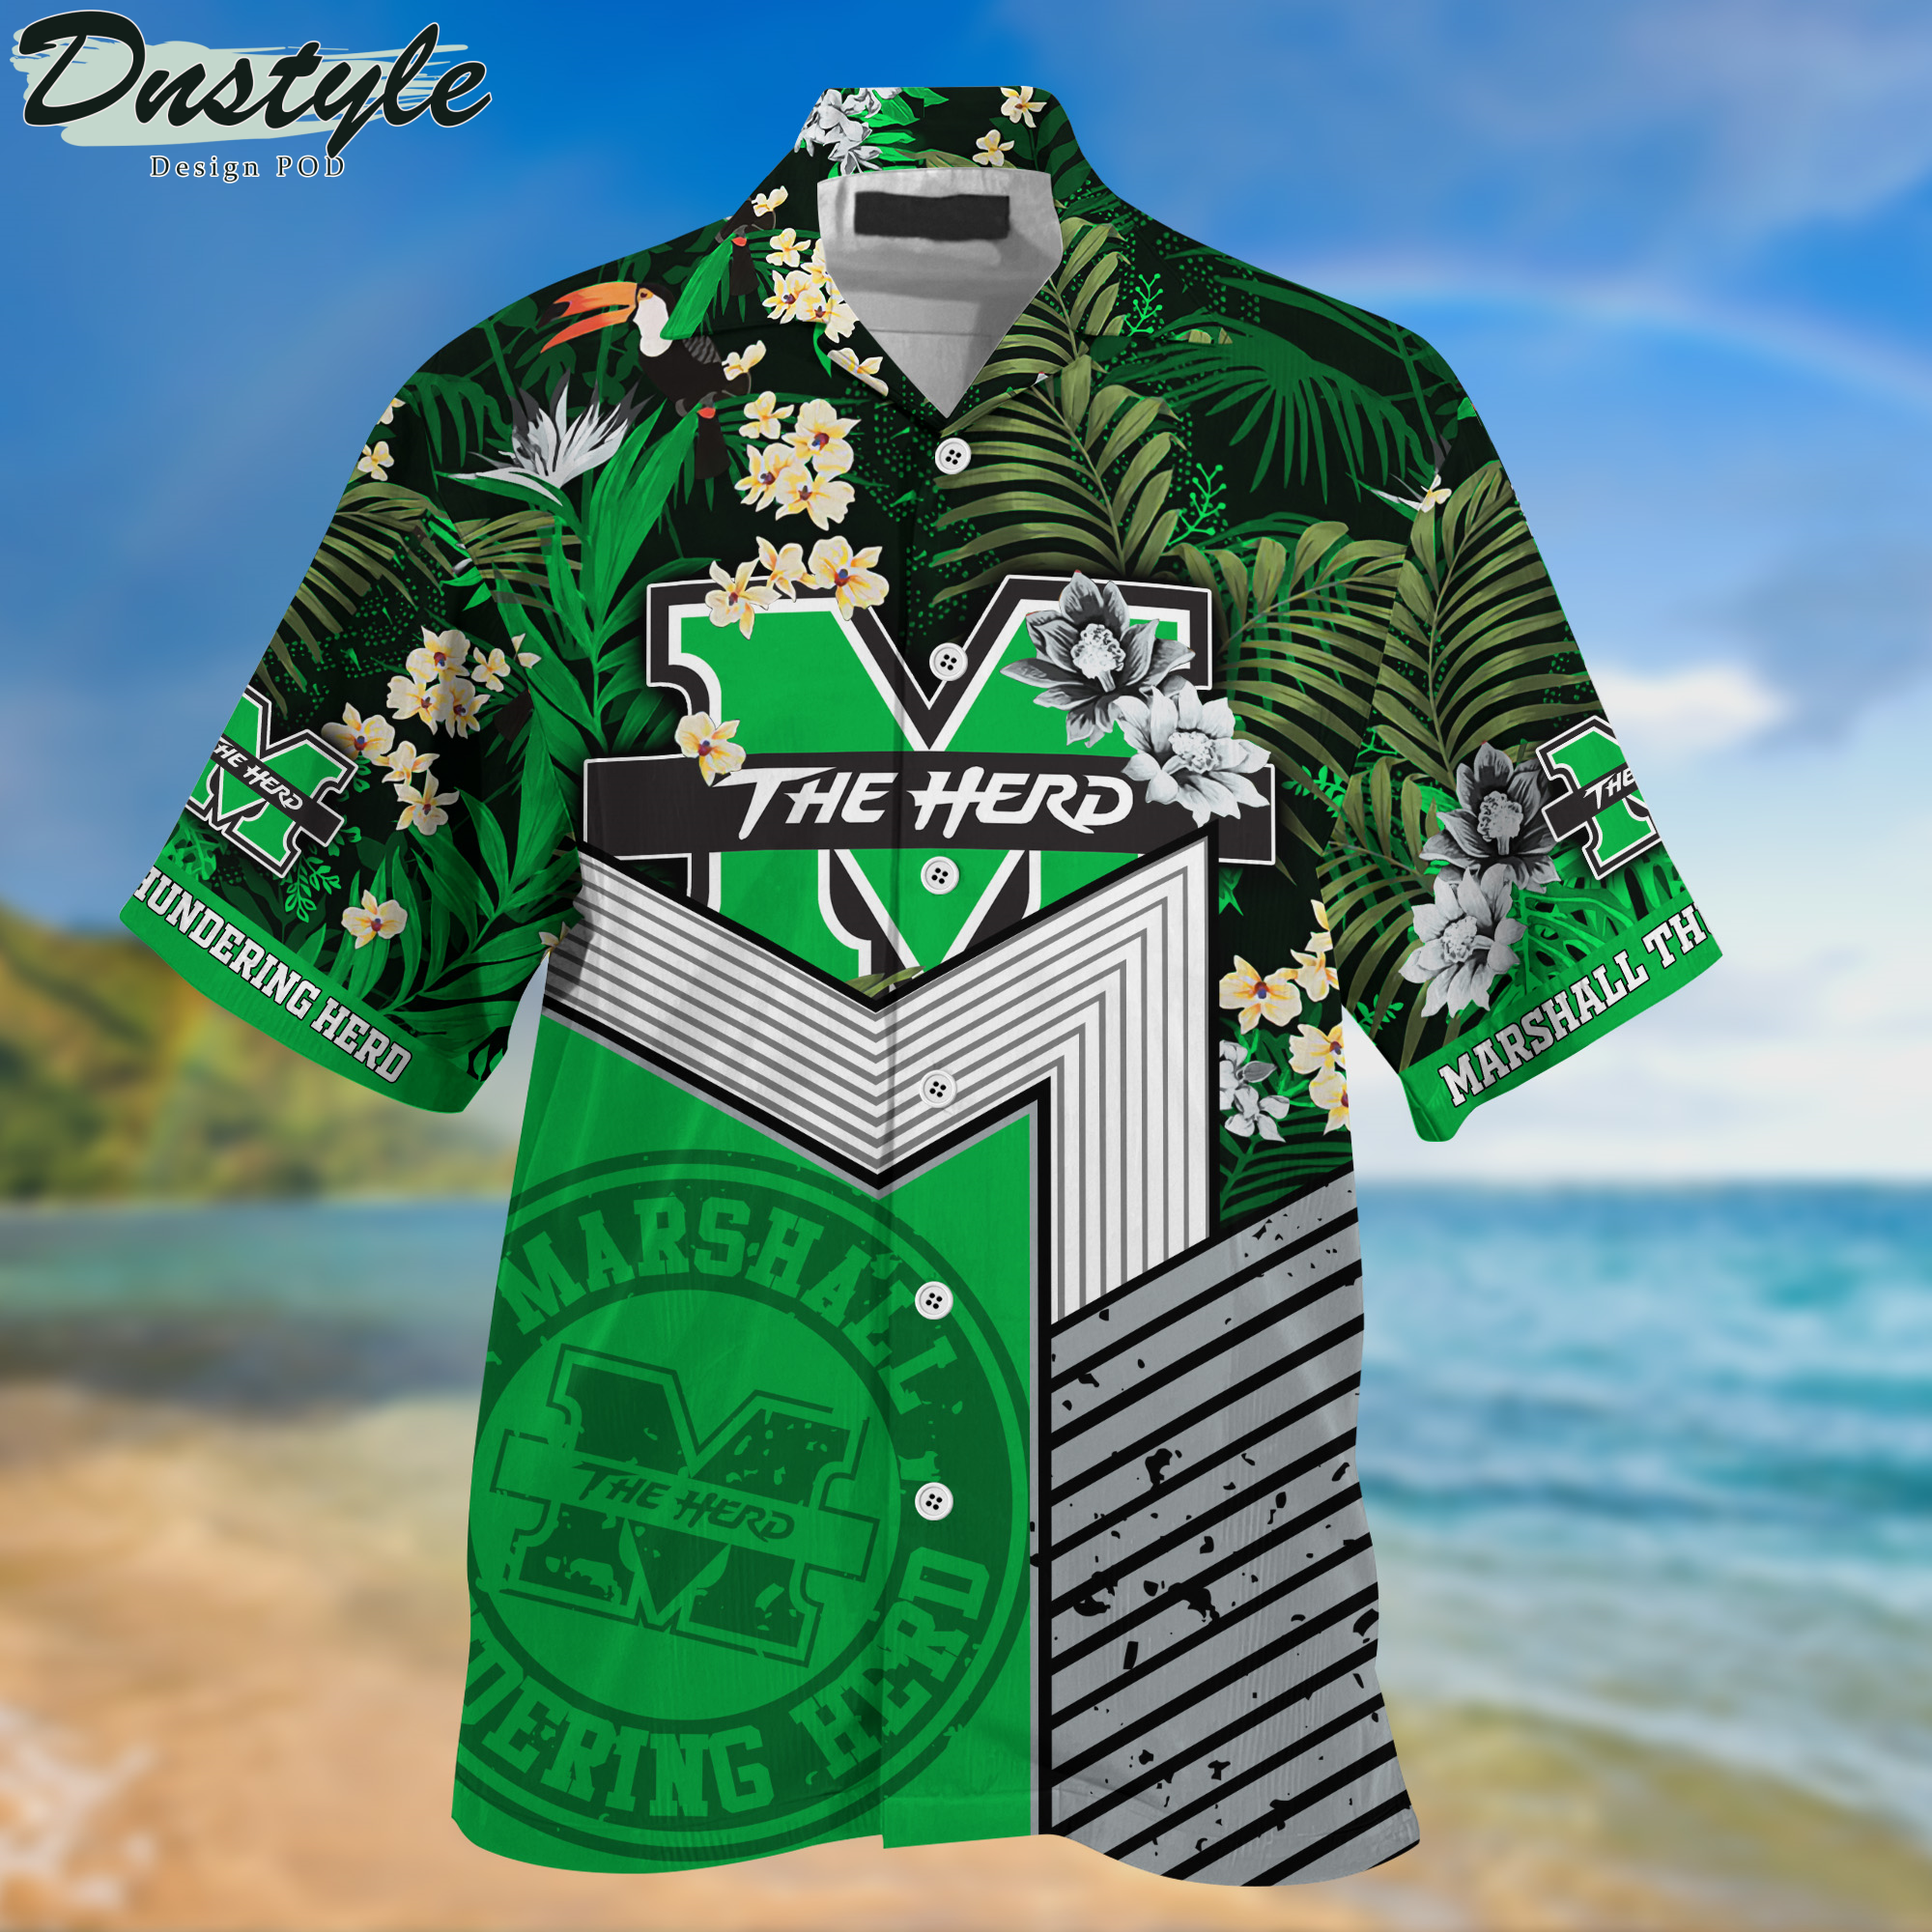 Marshall Thundering Herd Hawaii Shirt And Shorts New Collection